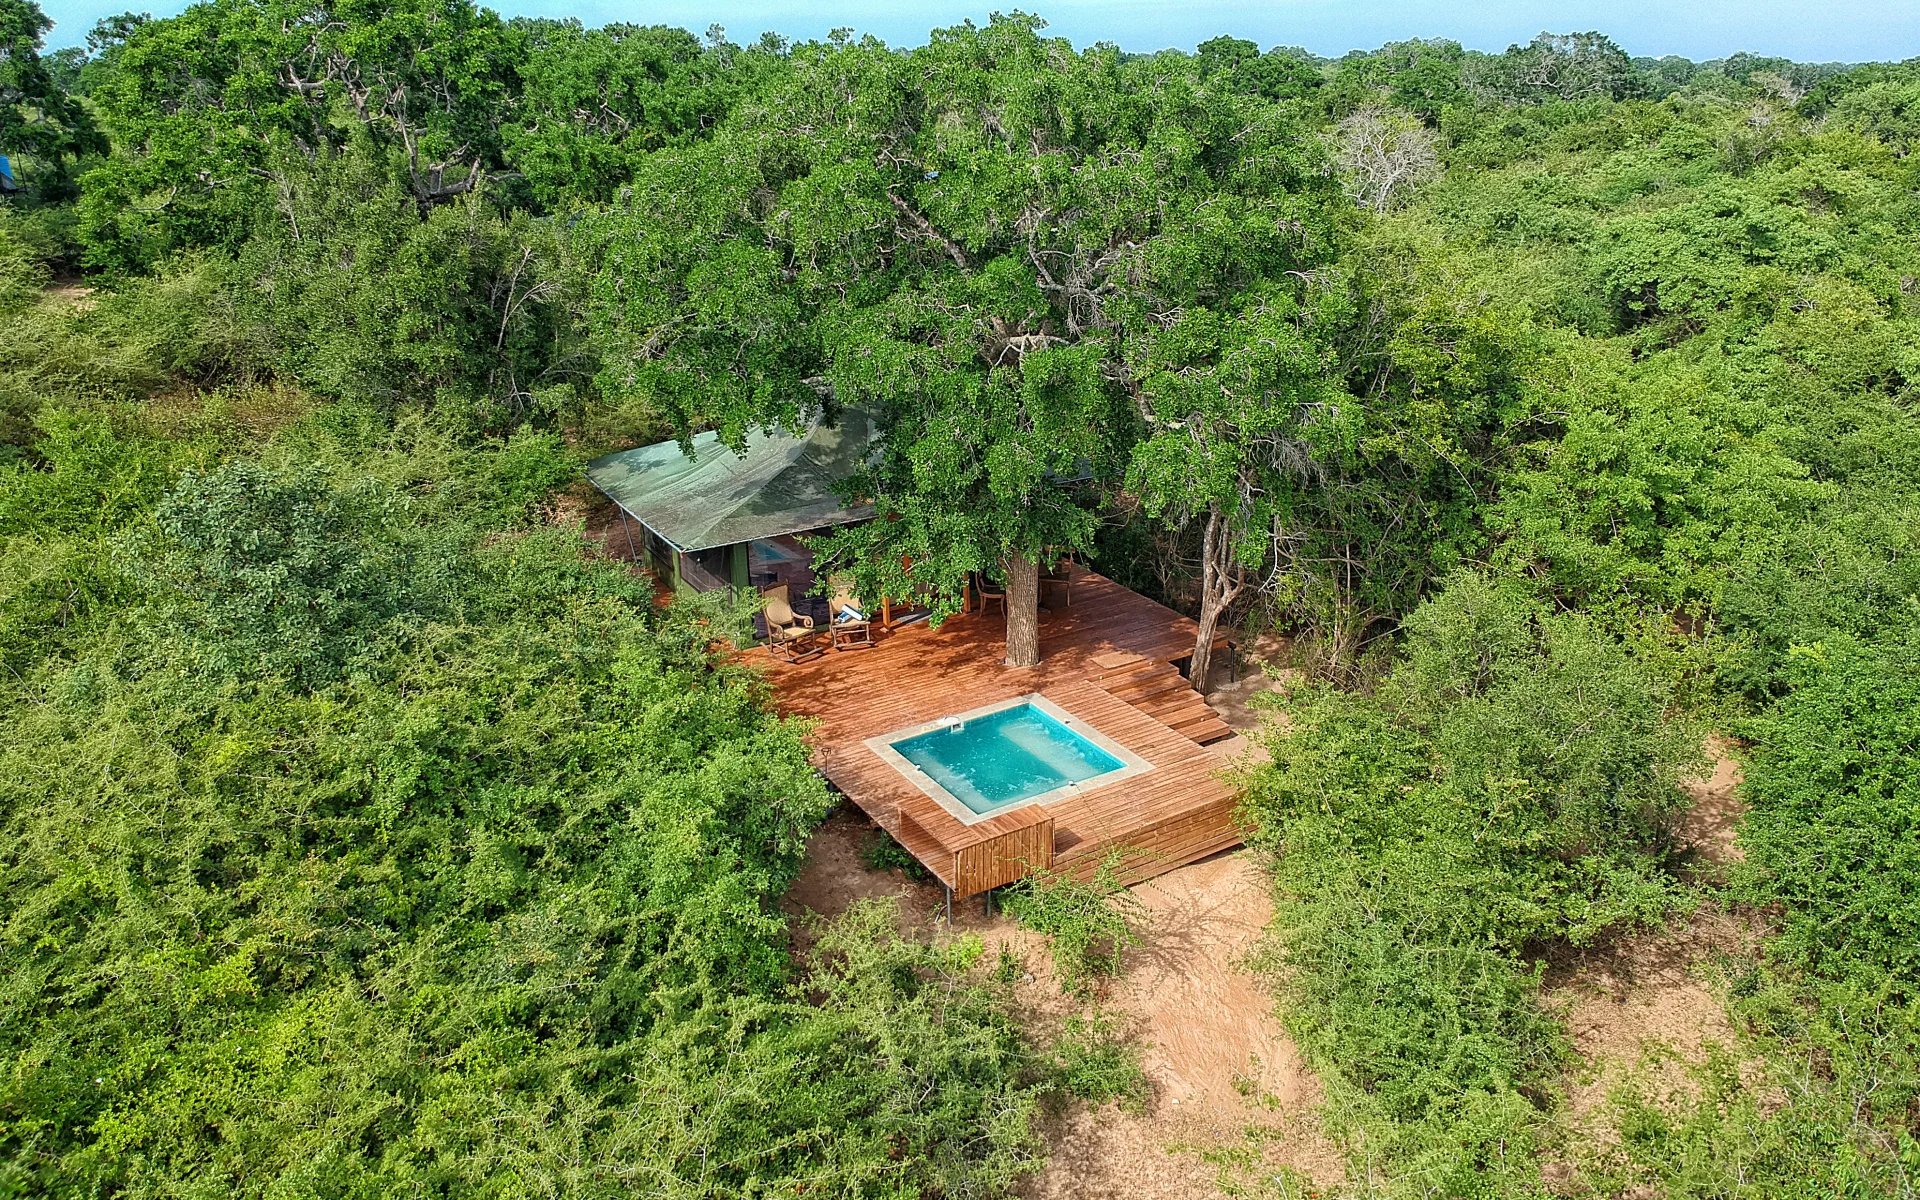 Tribe Yala's bungalows are surrounded by trees and have a pool situated on a wooden deck. 